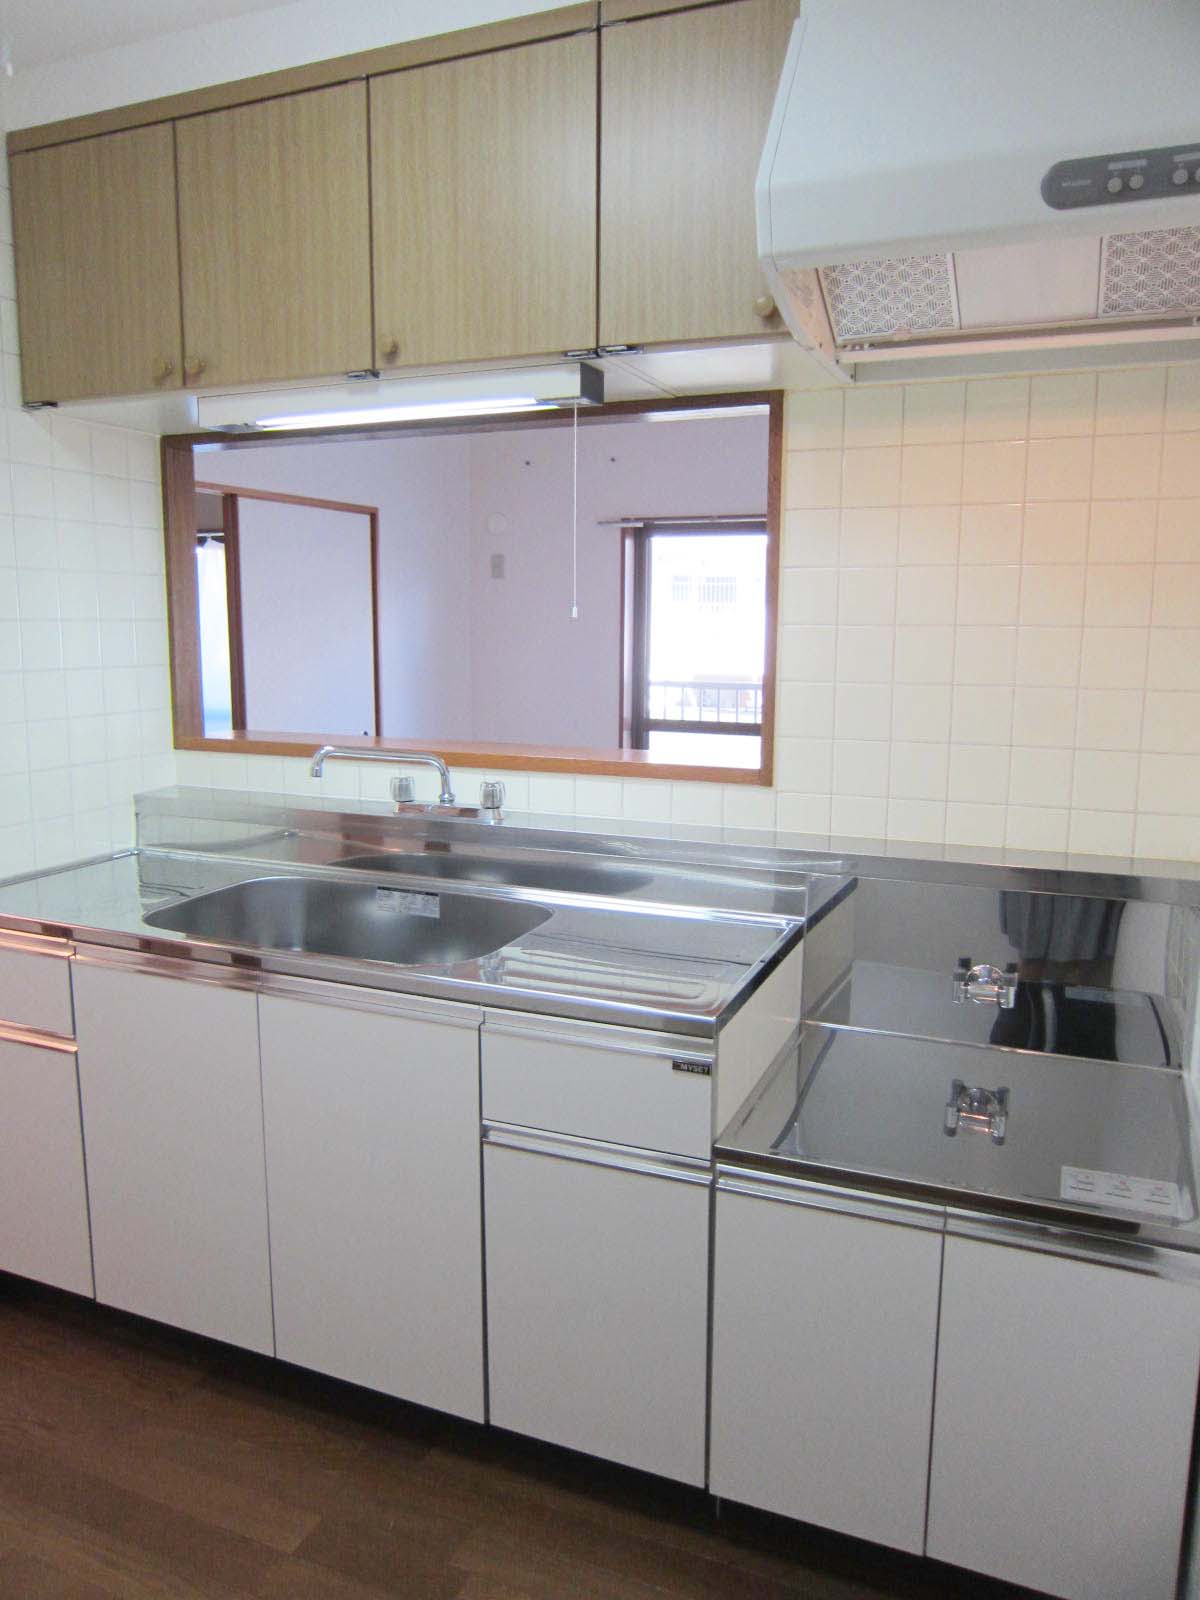 Kitchen. It is beautiful in the pre-reform